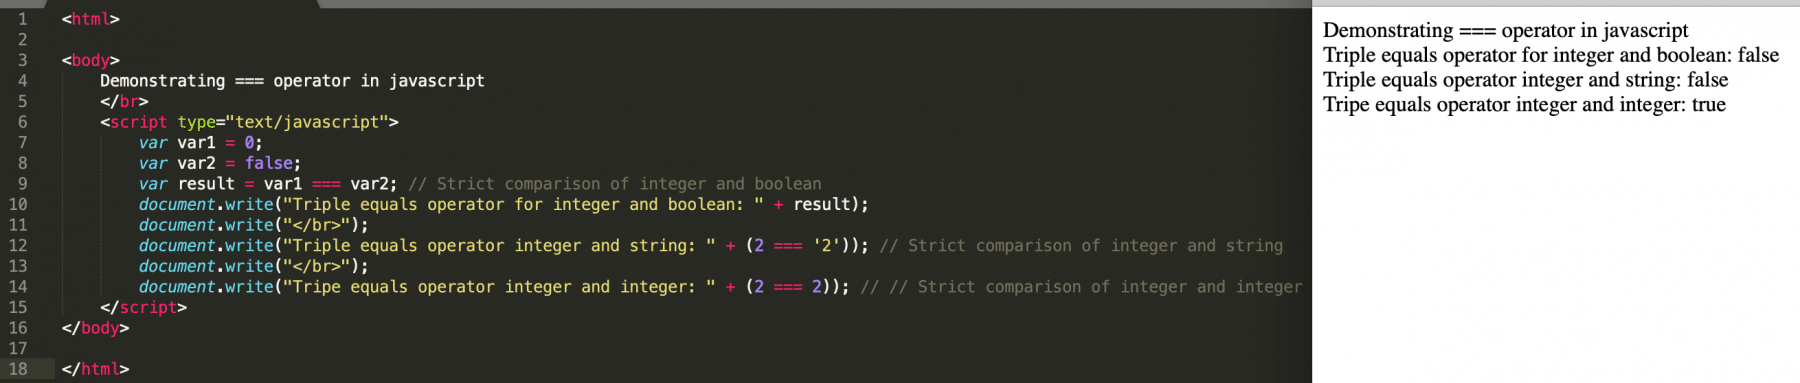  Code demonstrating usage of strict equality operator in Javascript